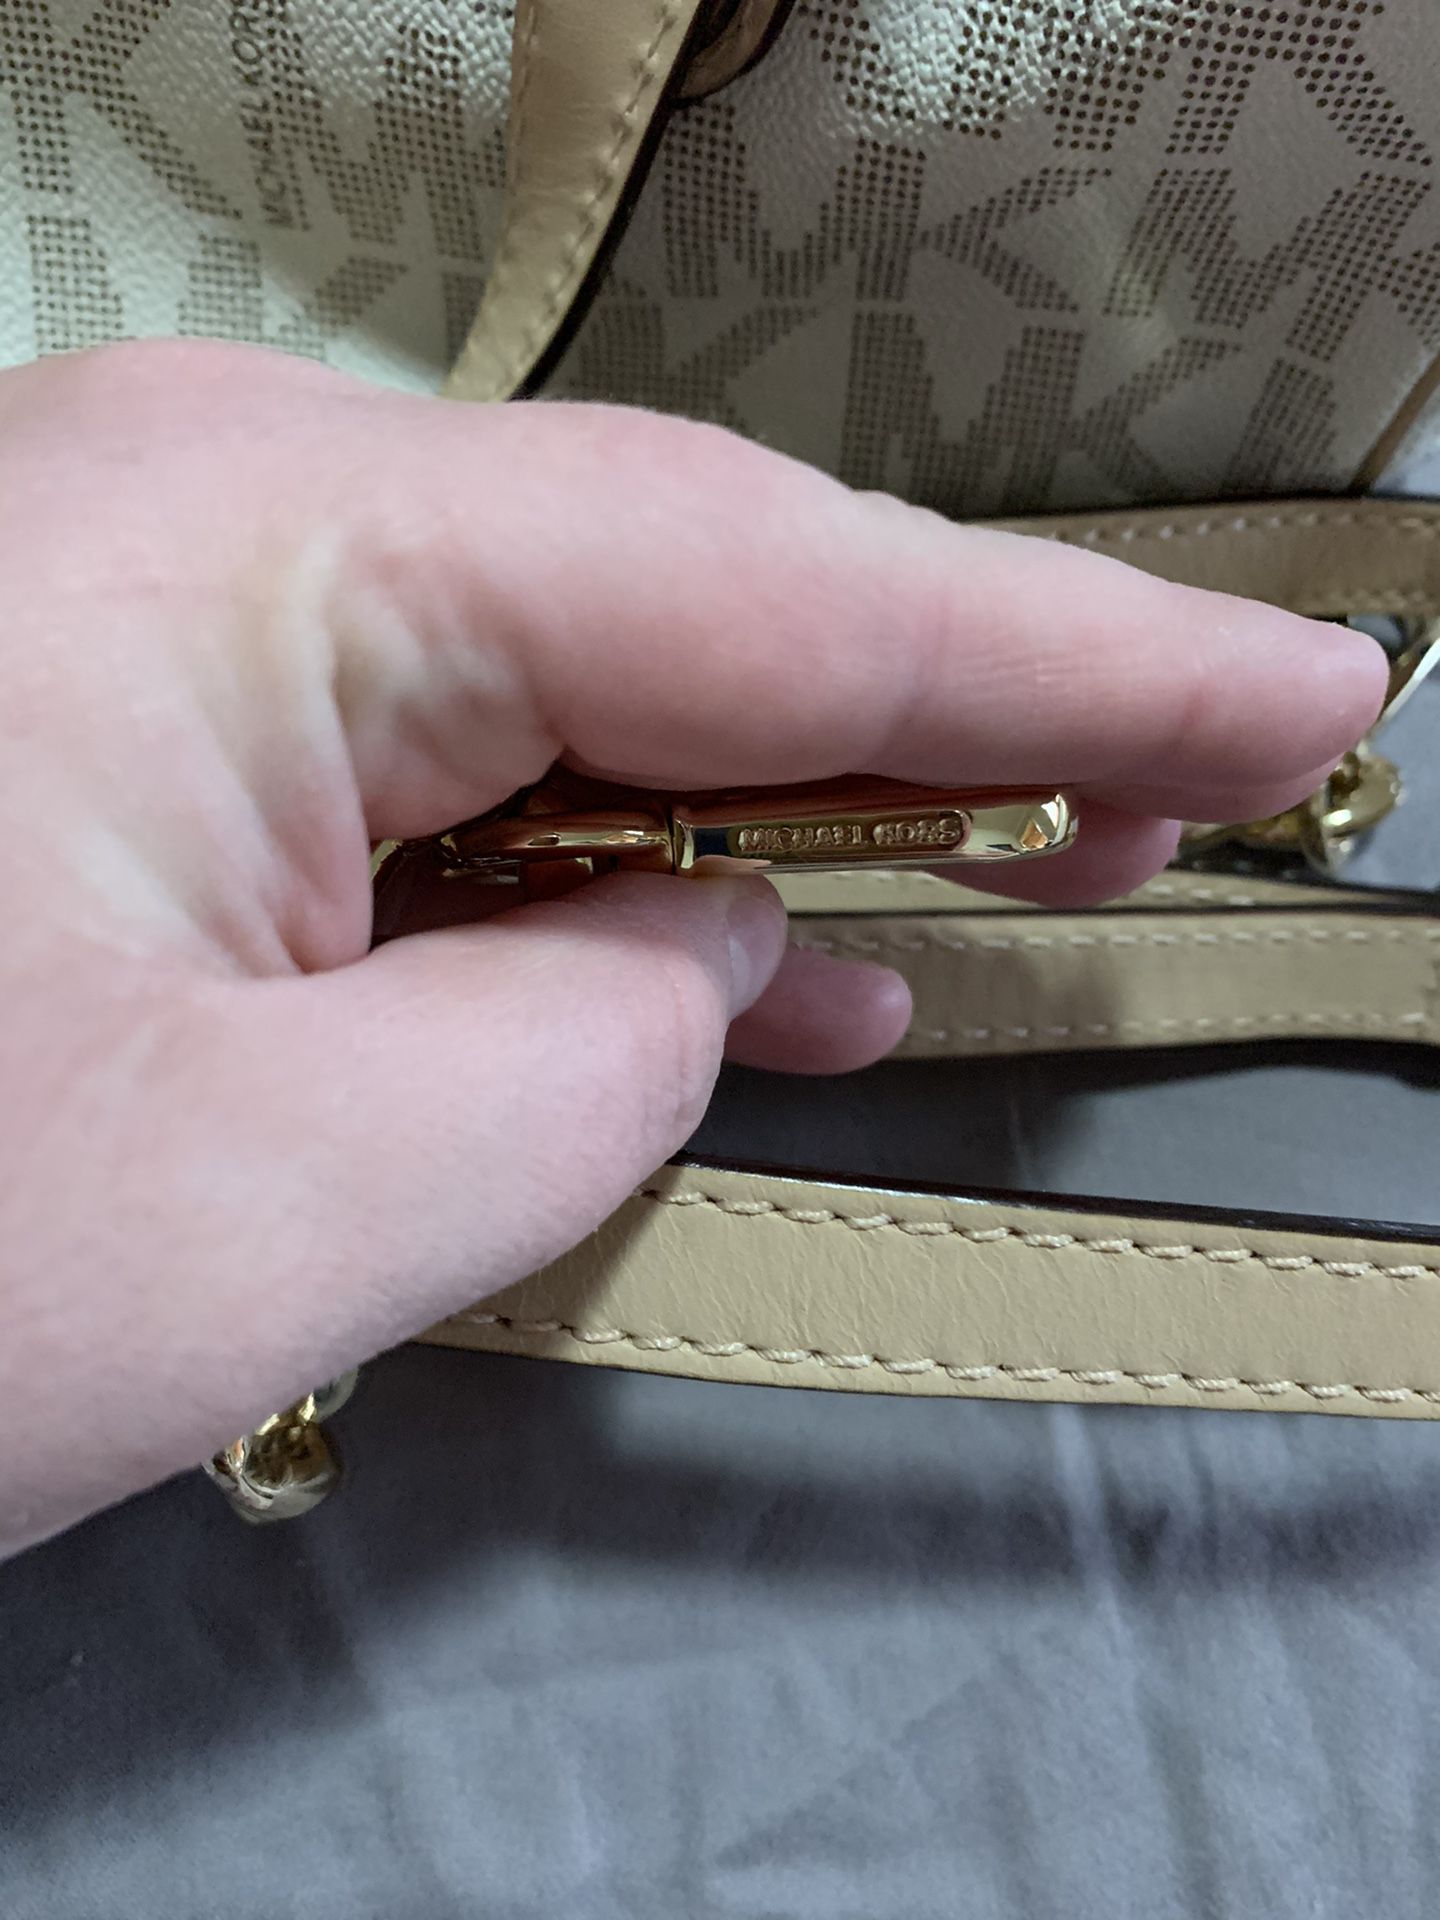 Authentic Michael Kors Tote Bag YKK Zippers with Matching Wallet (Matching  Set) (Not Sold Separately) White and Gold/Tan/Light Brown Handle and Chain